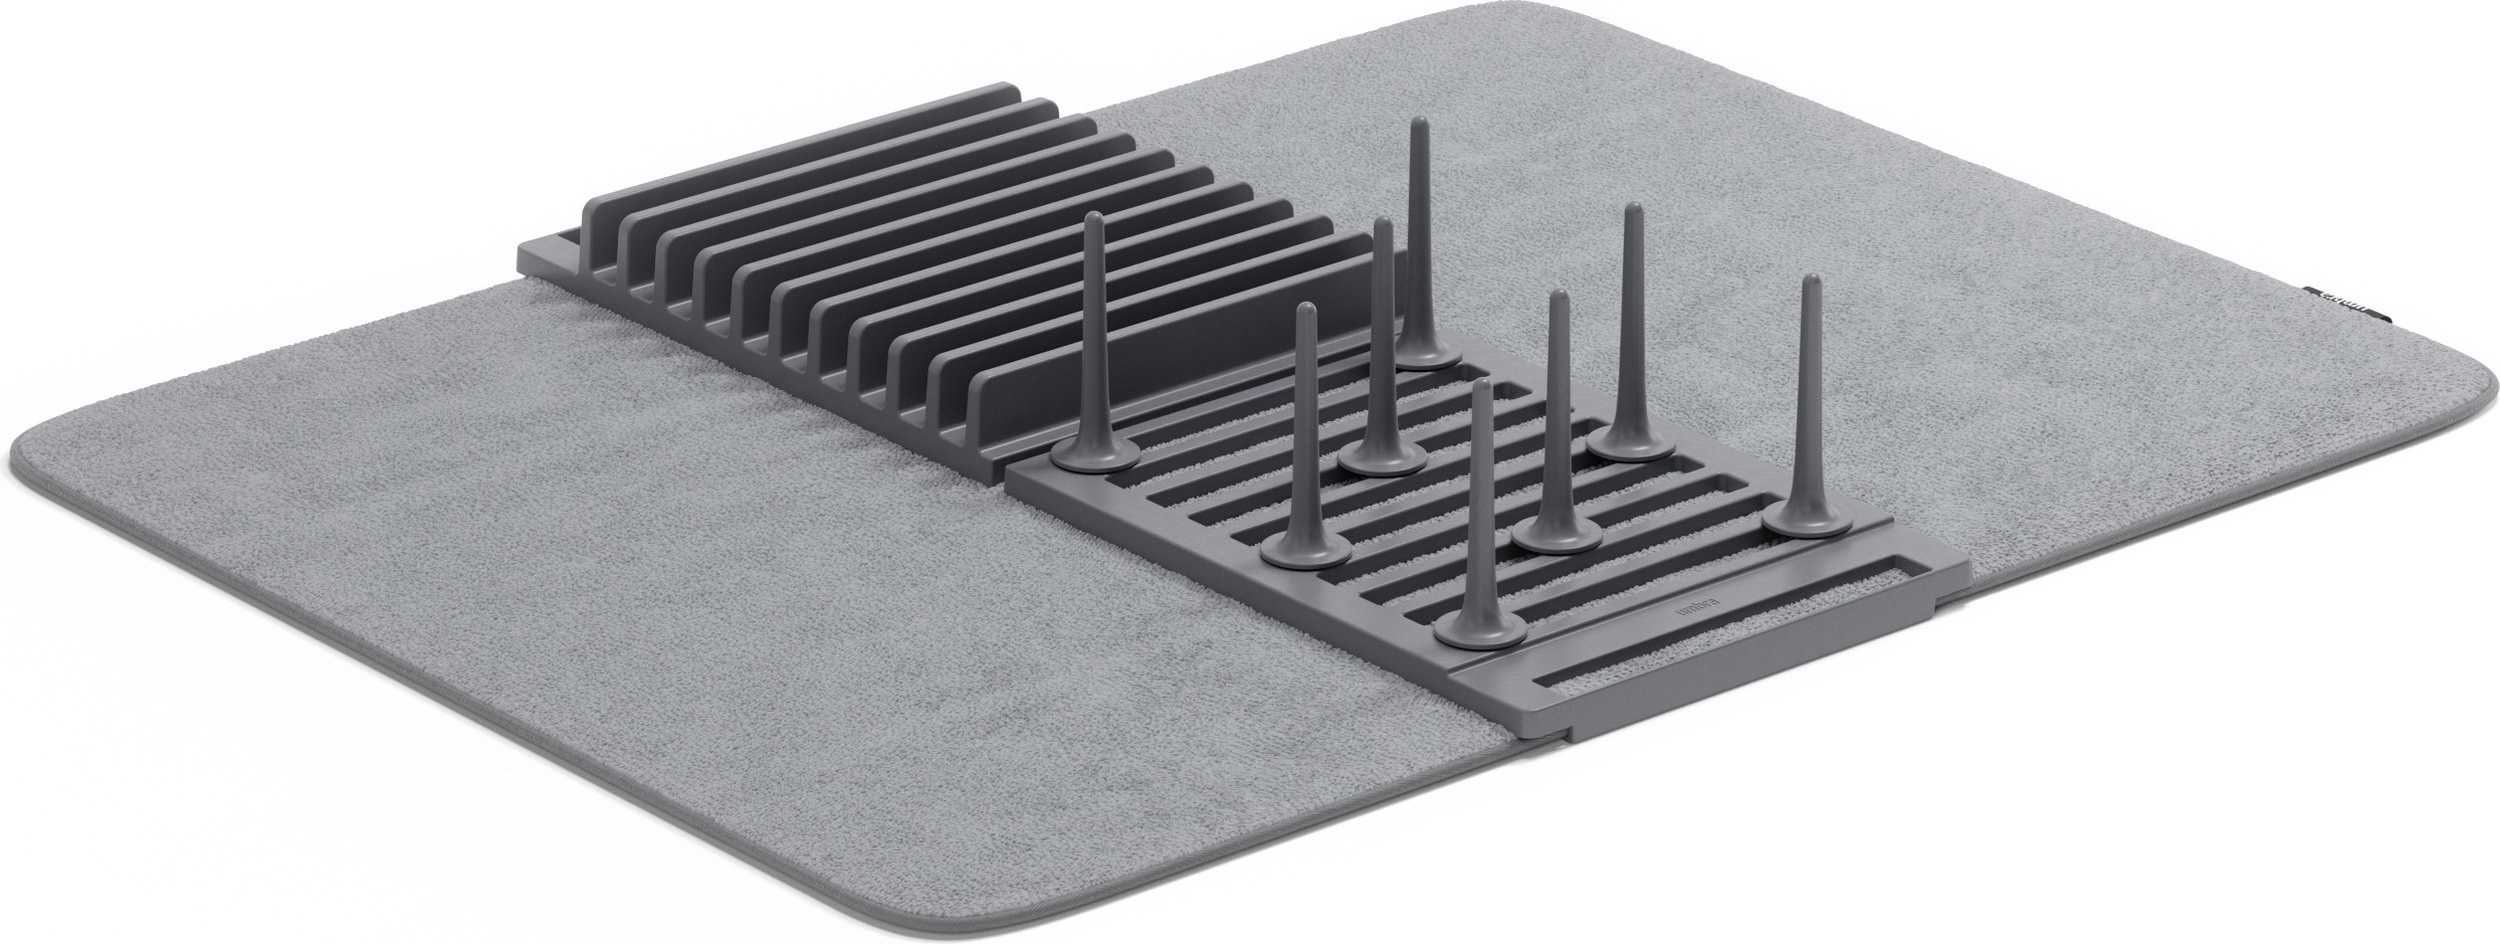 Umbra UDry Peg Drying Rack with Mat